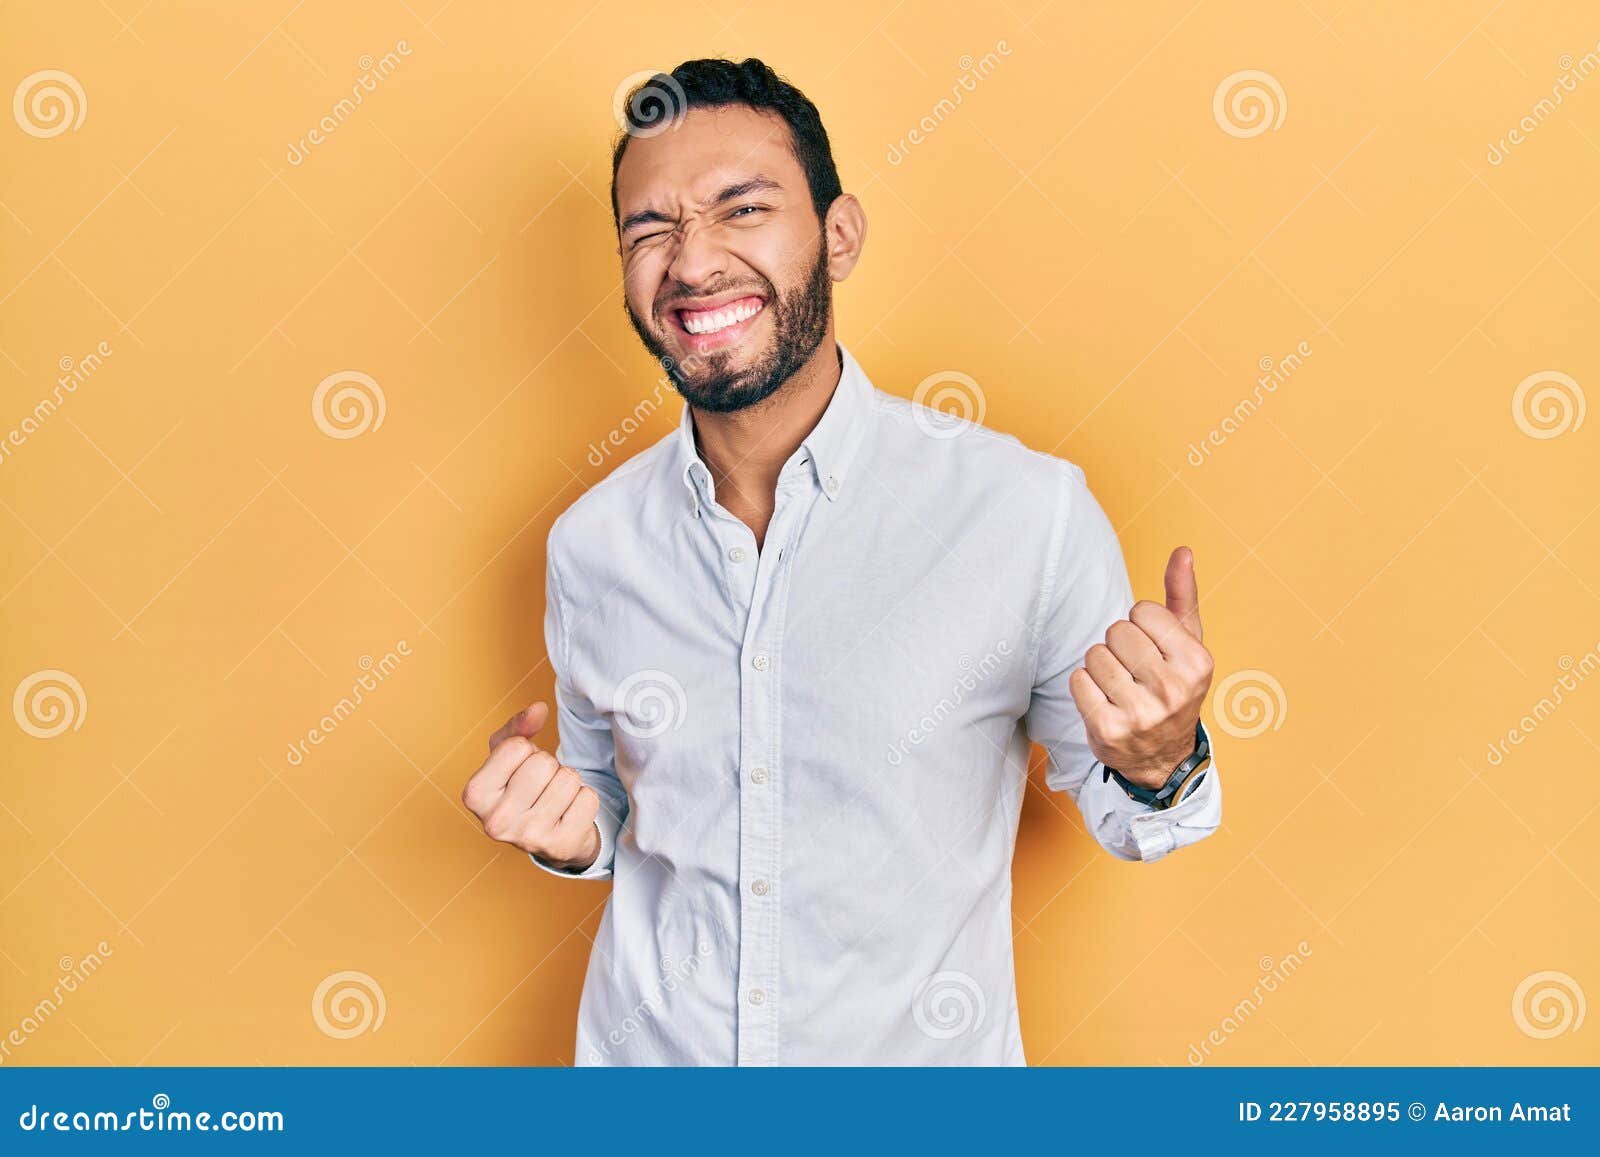 Hispanic Man with Beard Wearing Business Shirt Very Happy and Excited ...